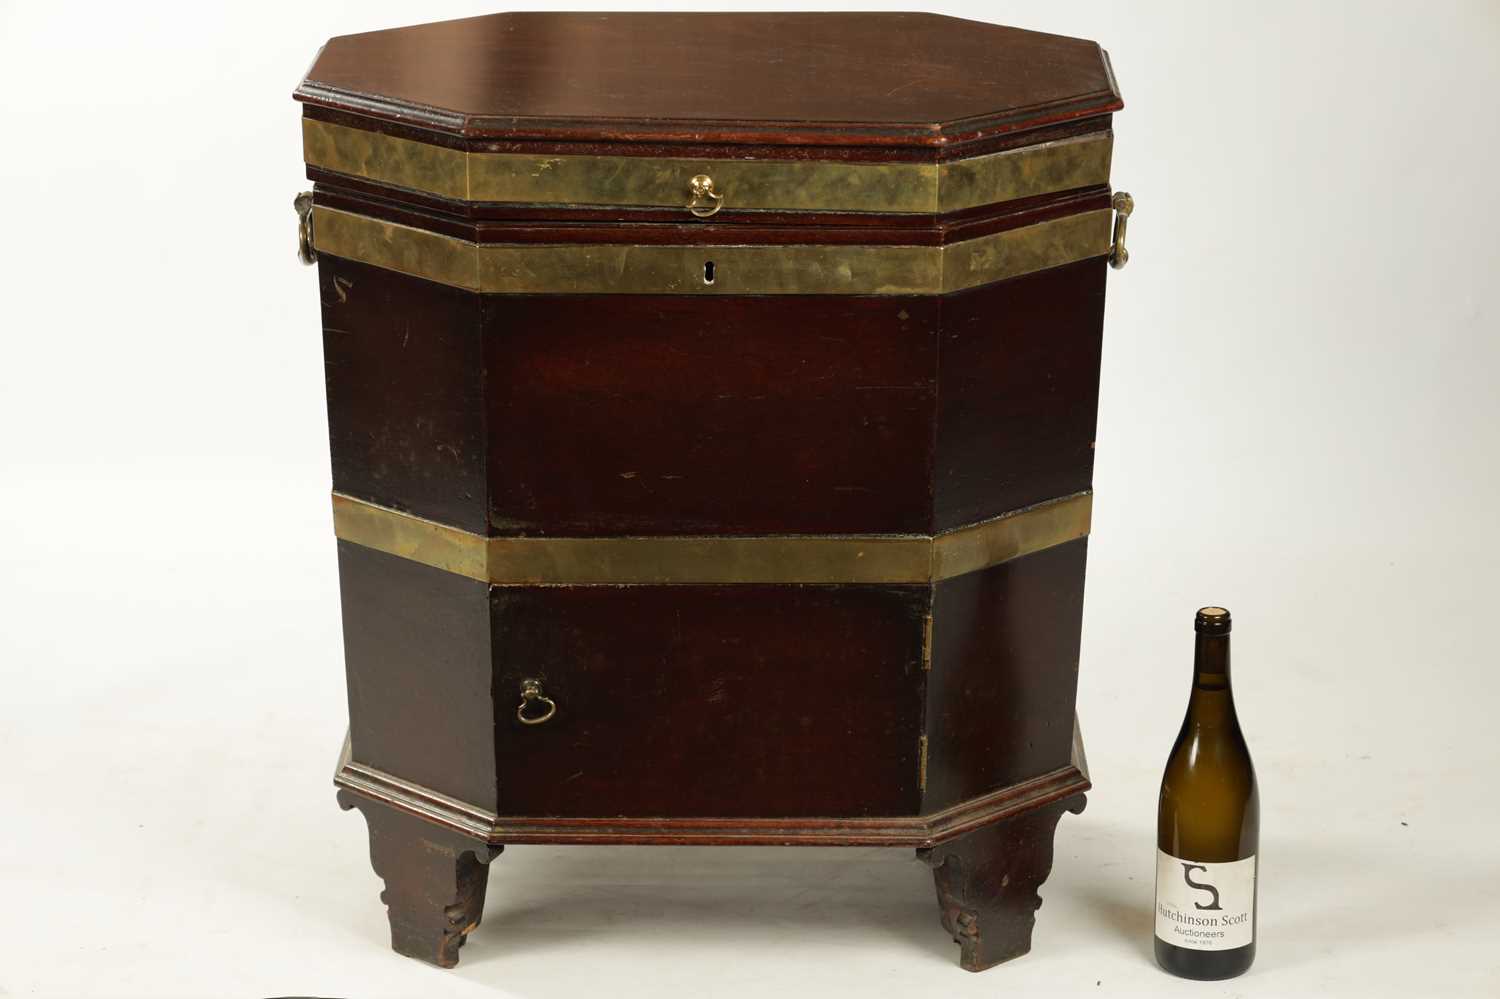 A RARE GEORGE III MAHOGANY OCTAGONAL TOP BRASS BOUND WINE COOLER - Image 2 of 6